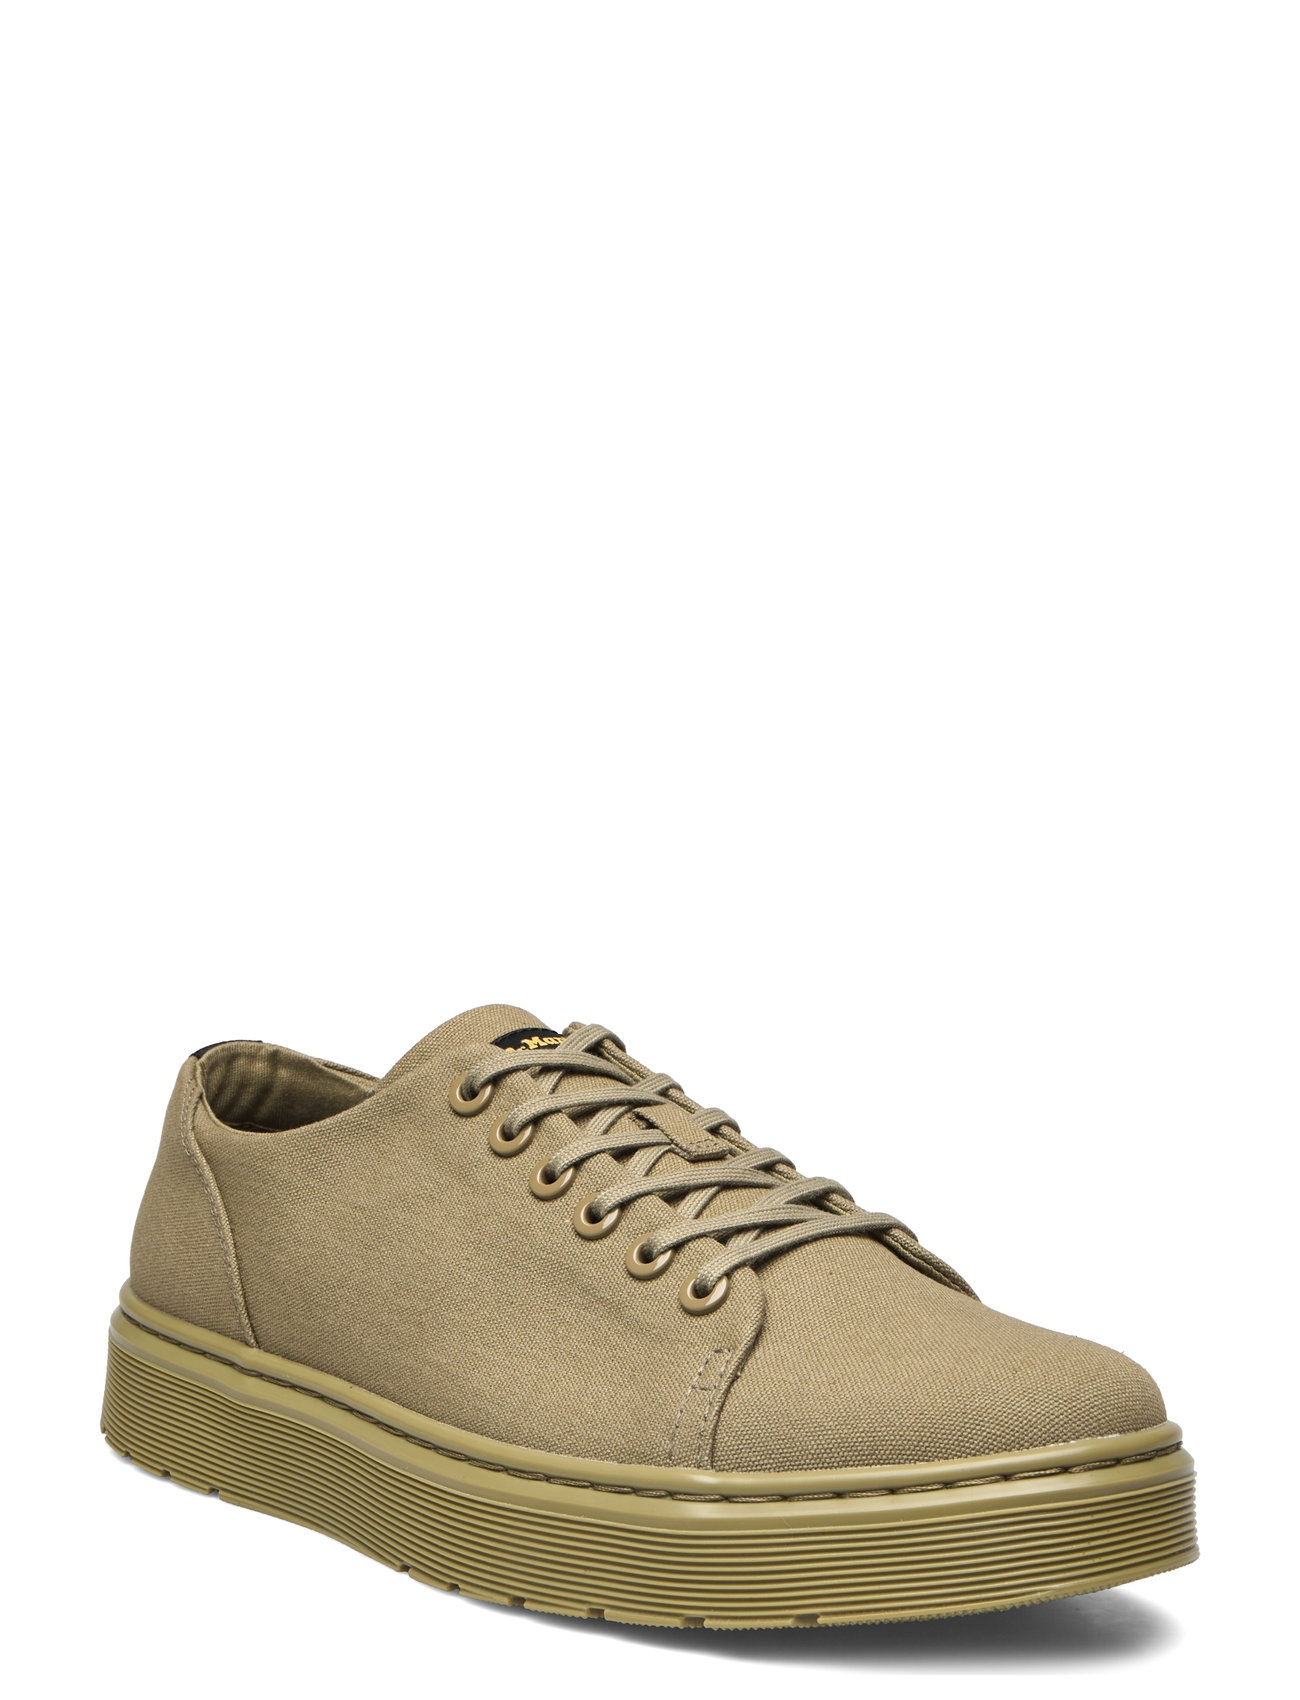 Dante Muted Olive Canvas Designers Sneakers Low-top Sneakers Green Dr. Martens